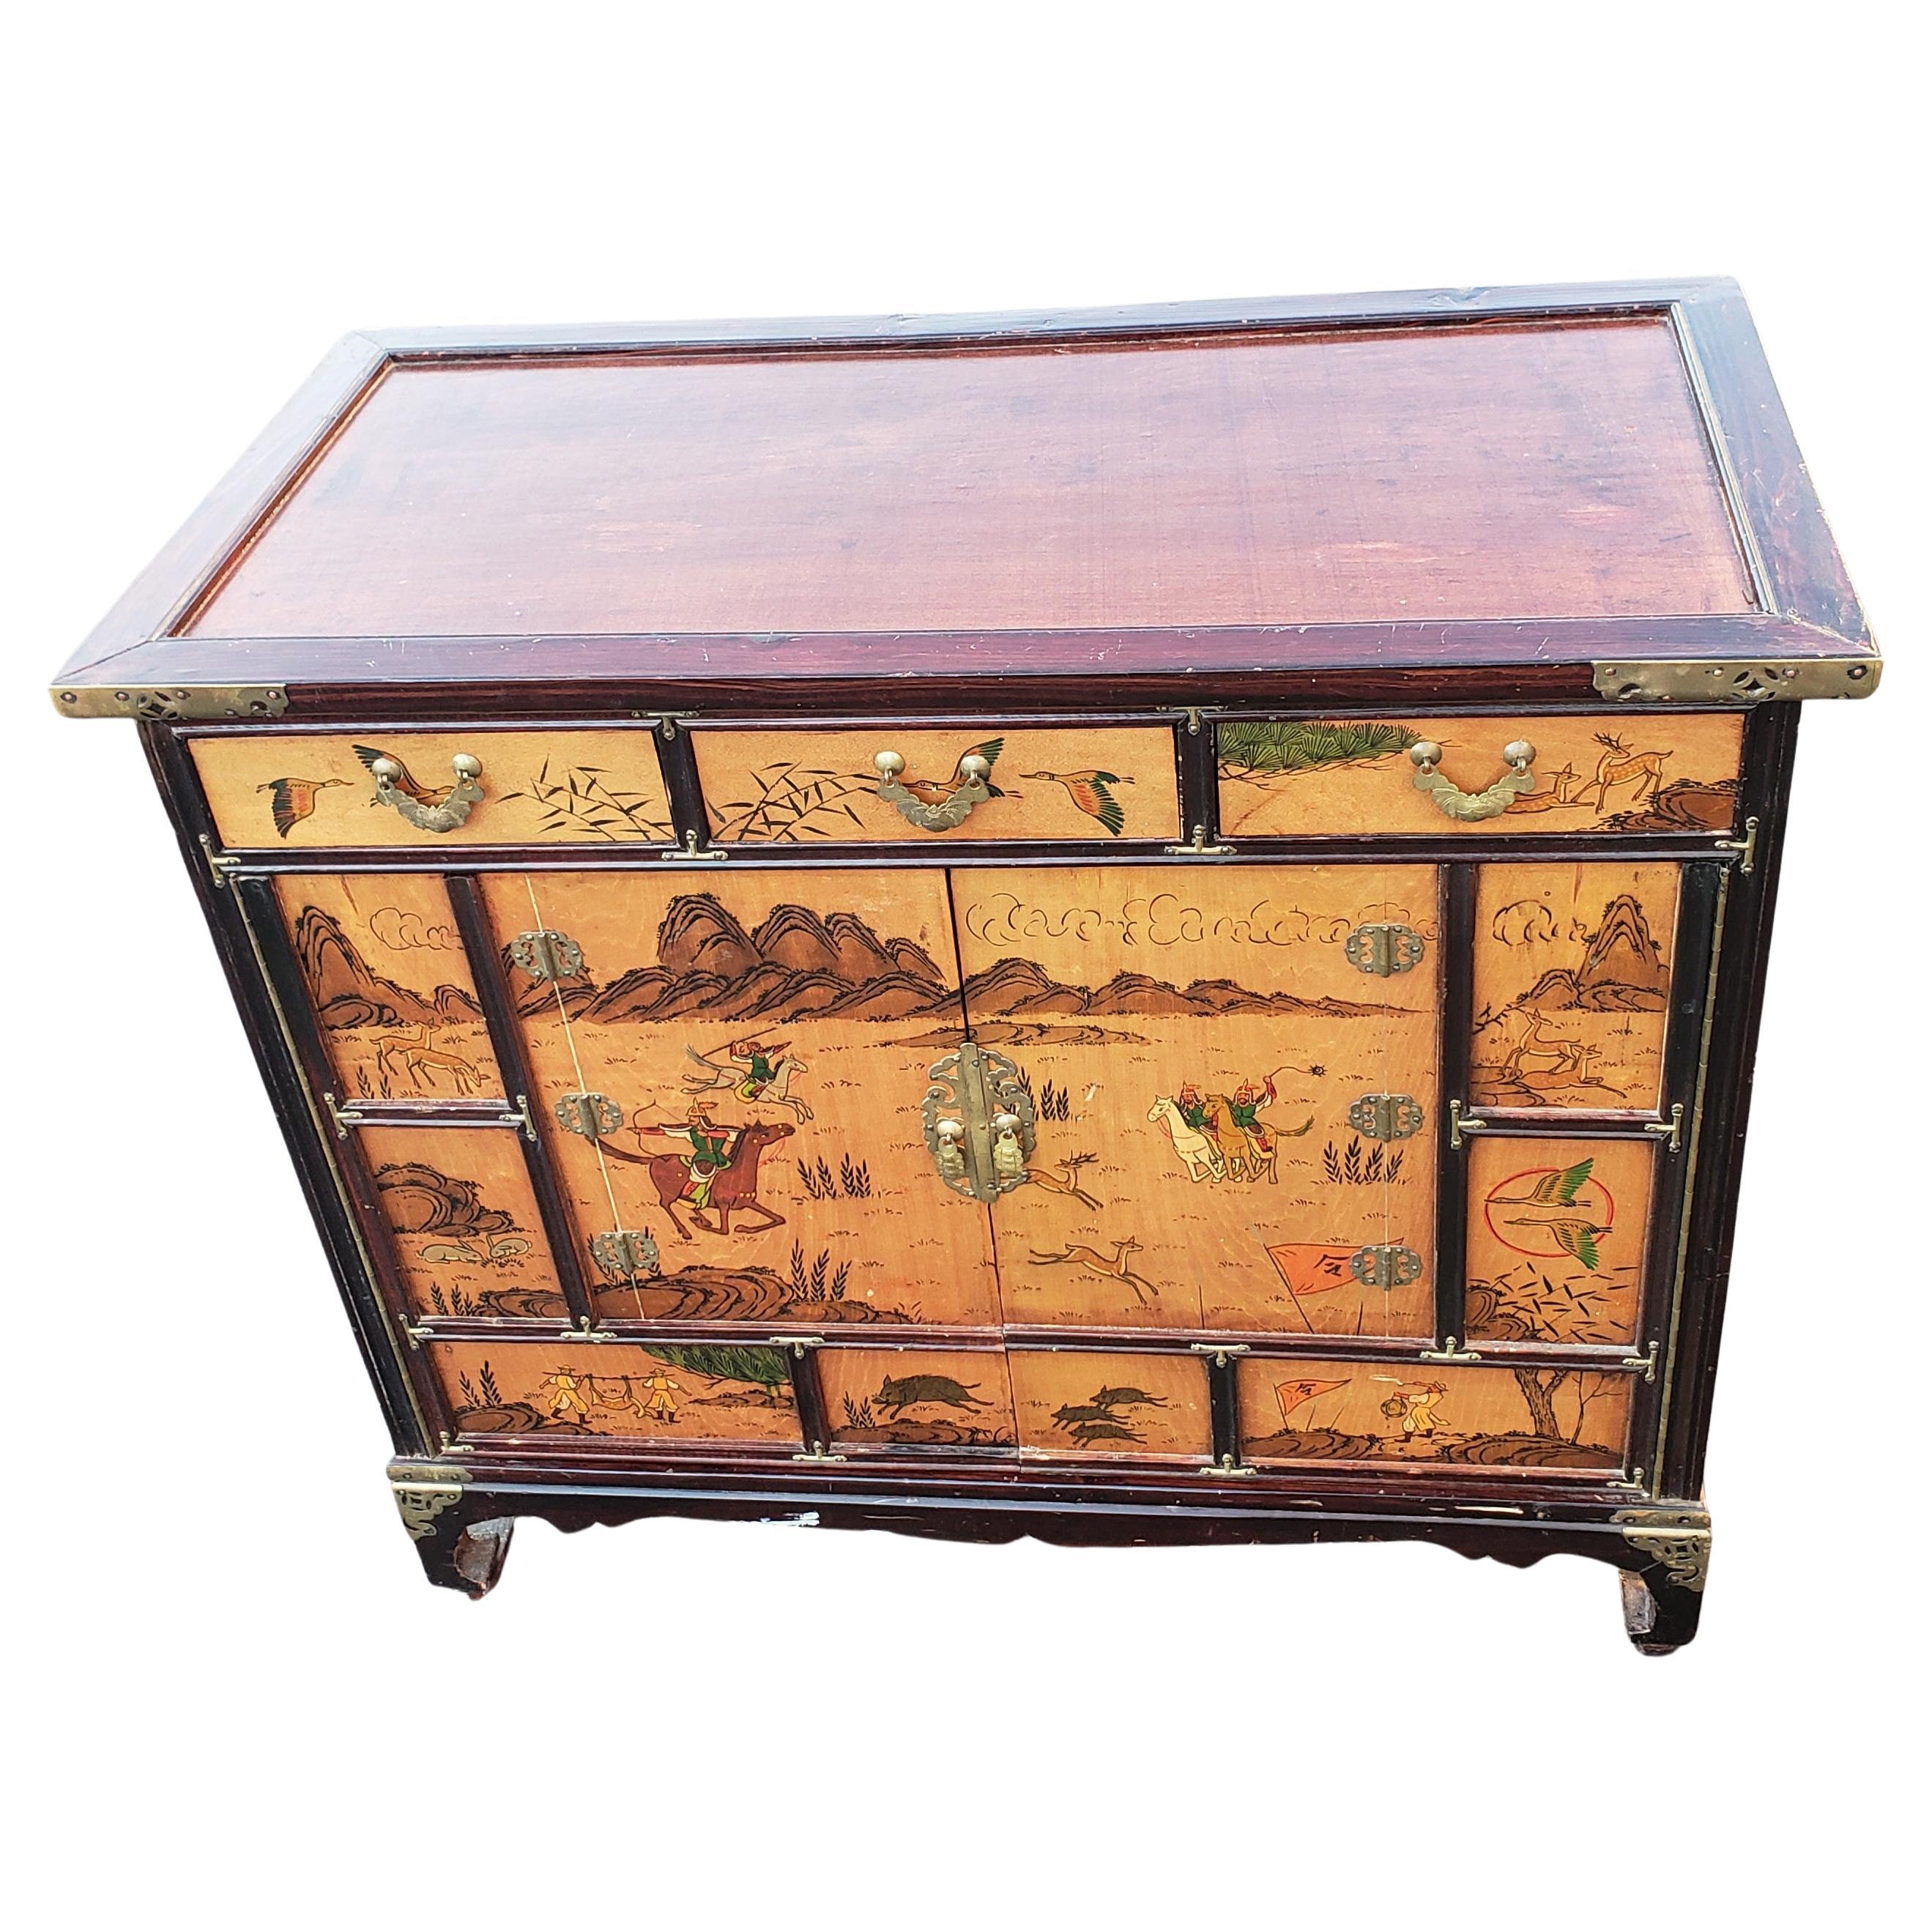 Scarlet paint with chinoiserie paint decoration. Three drawers
Very good condition. 
Measures: 34 25